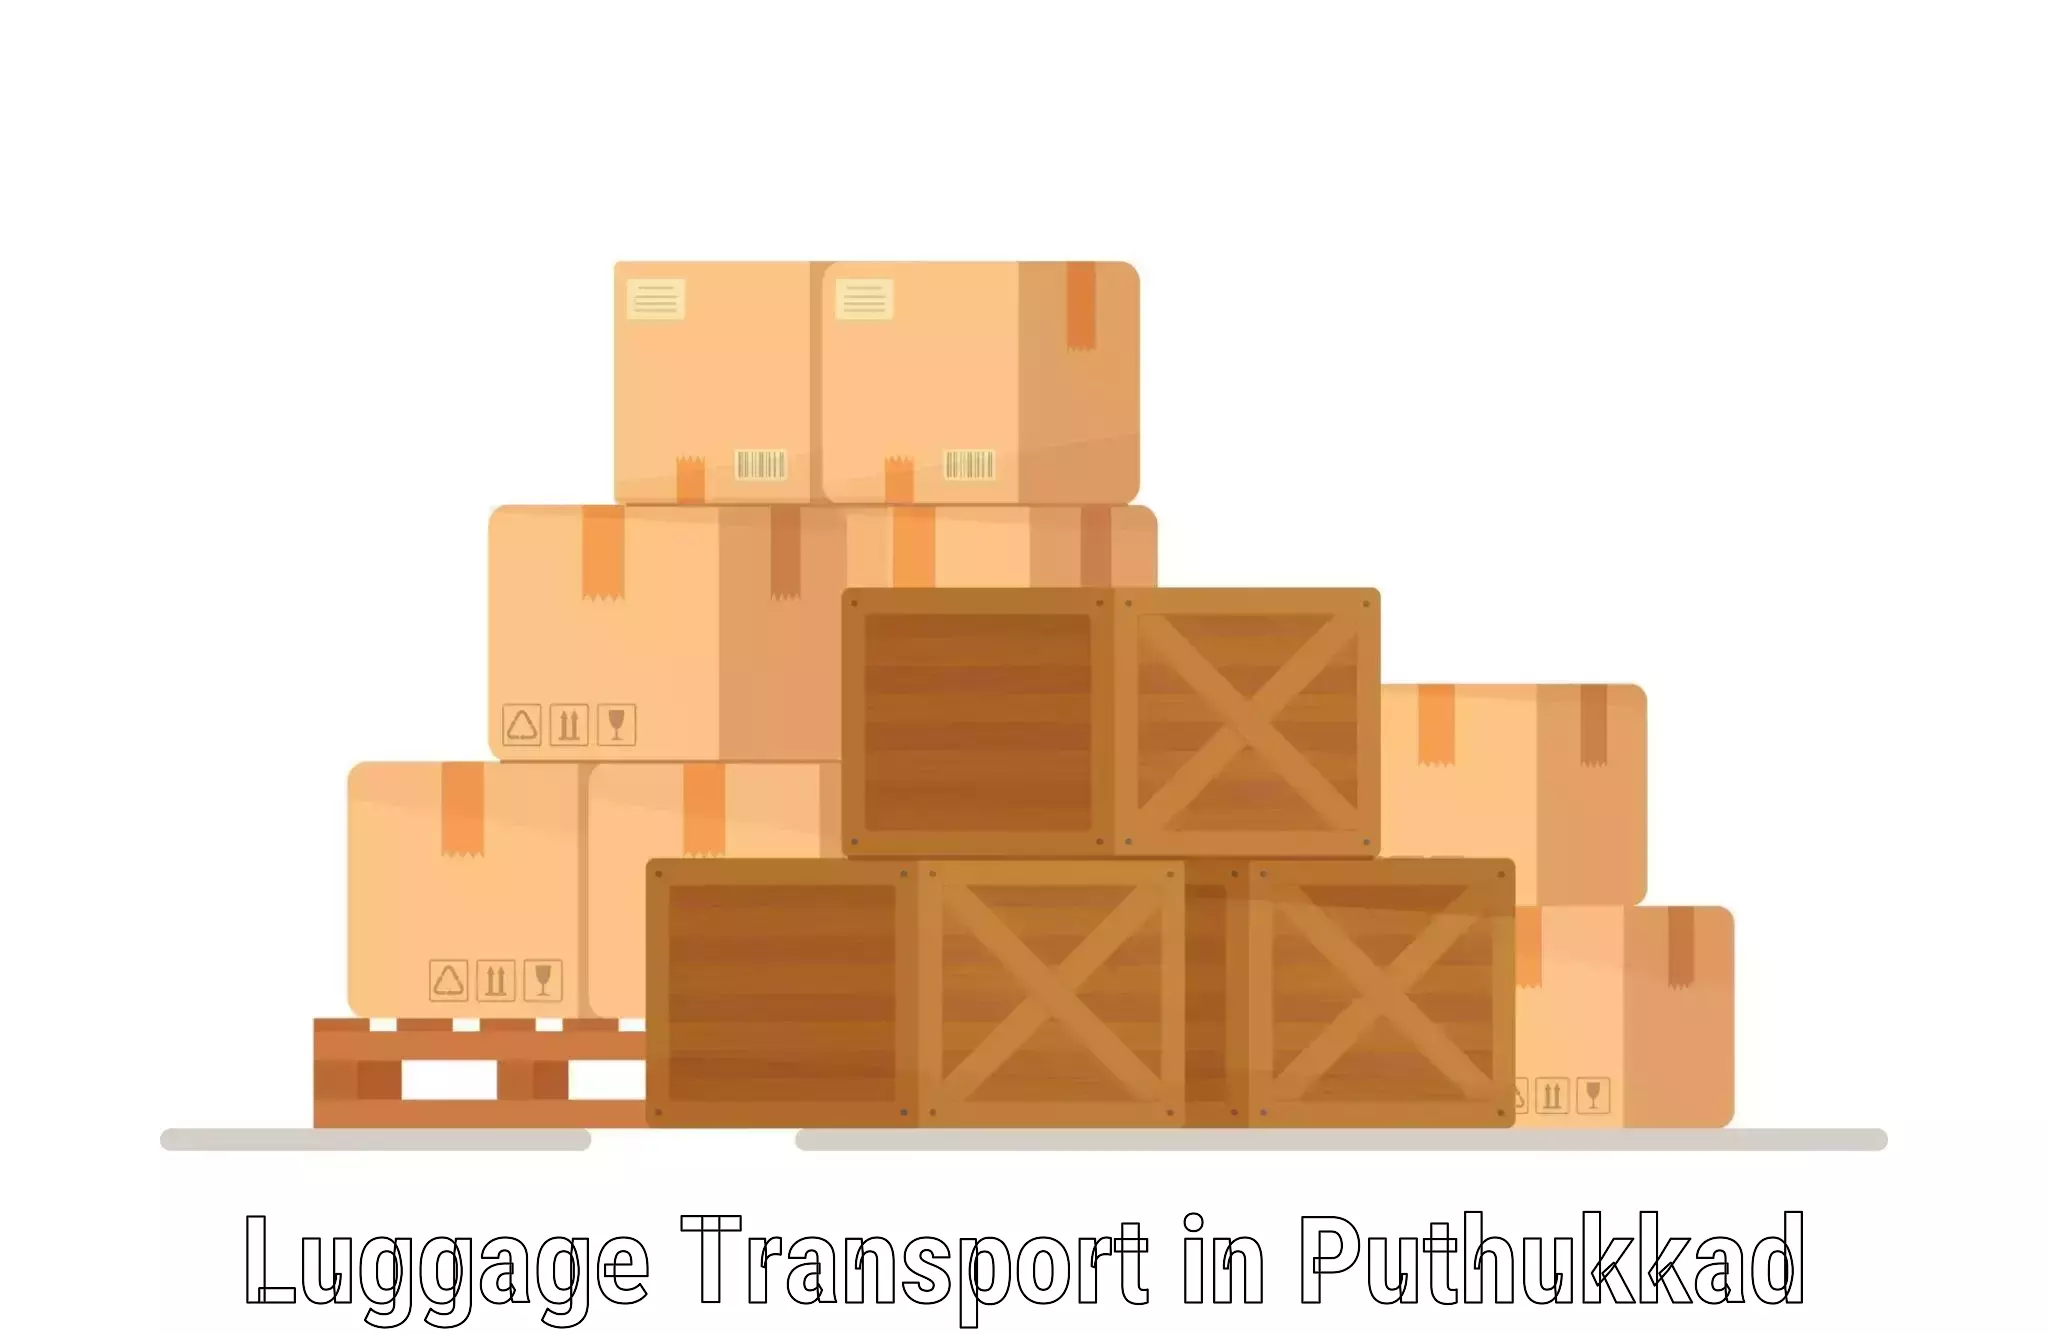 Luggage shipping guide in Puthukkad